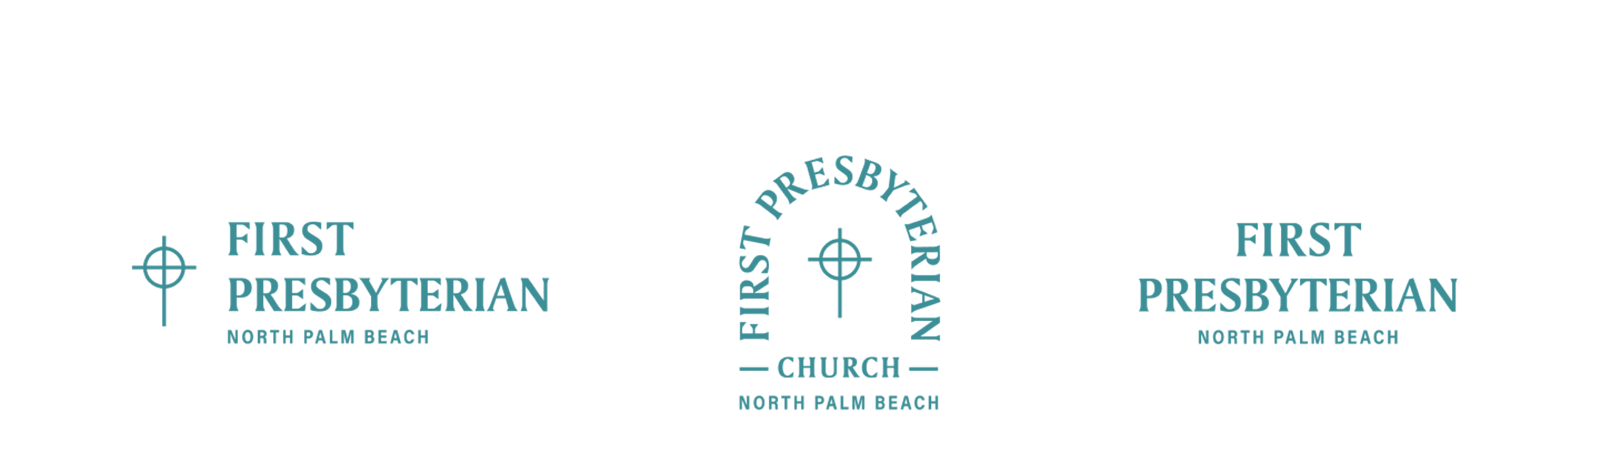 First Presbyterian Church of North Palm Beach logo variations in left aligned, arched and stacked layouts.